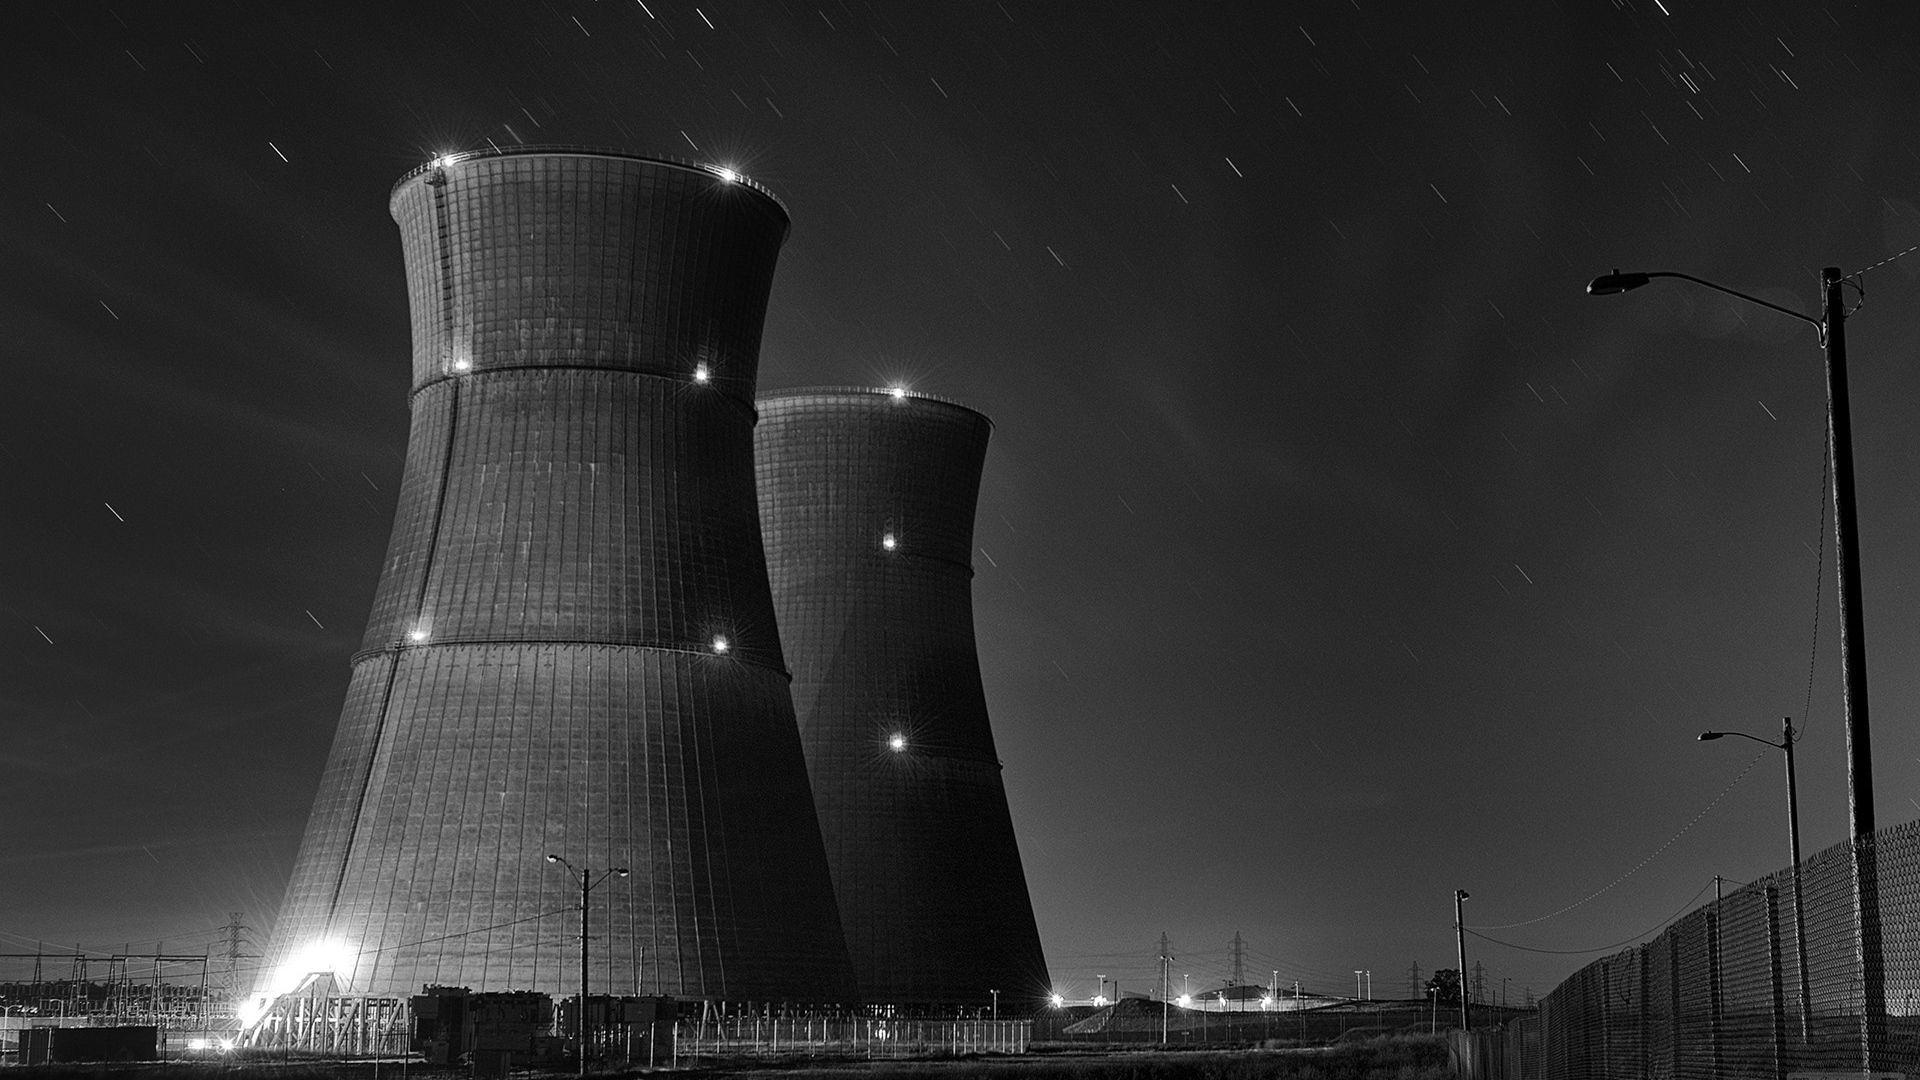 1K Nuclear Power Plant Pictures  Download Free Images on Unsplash